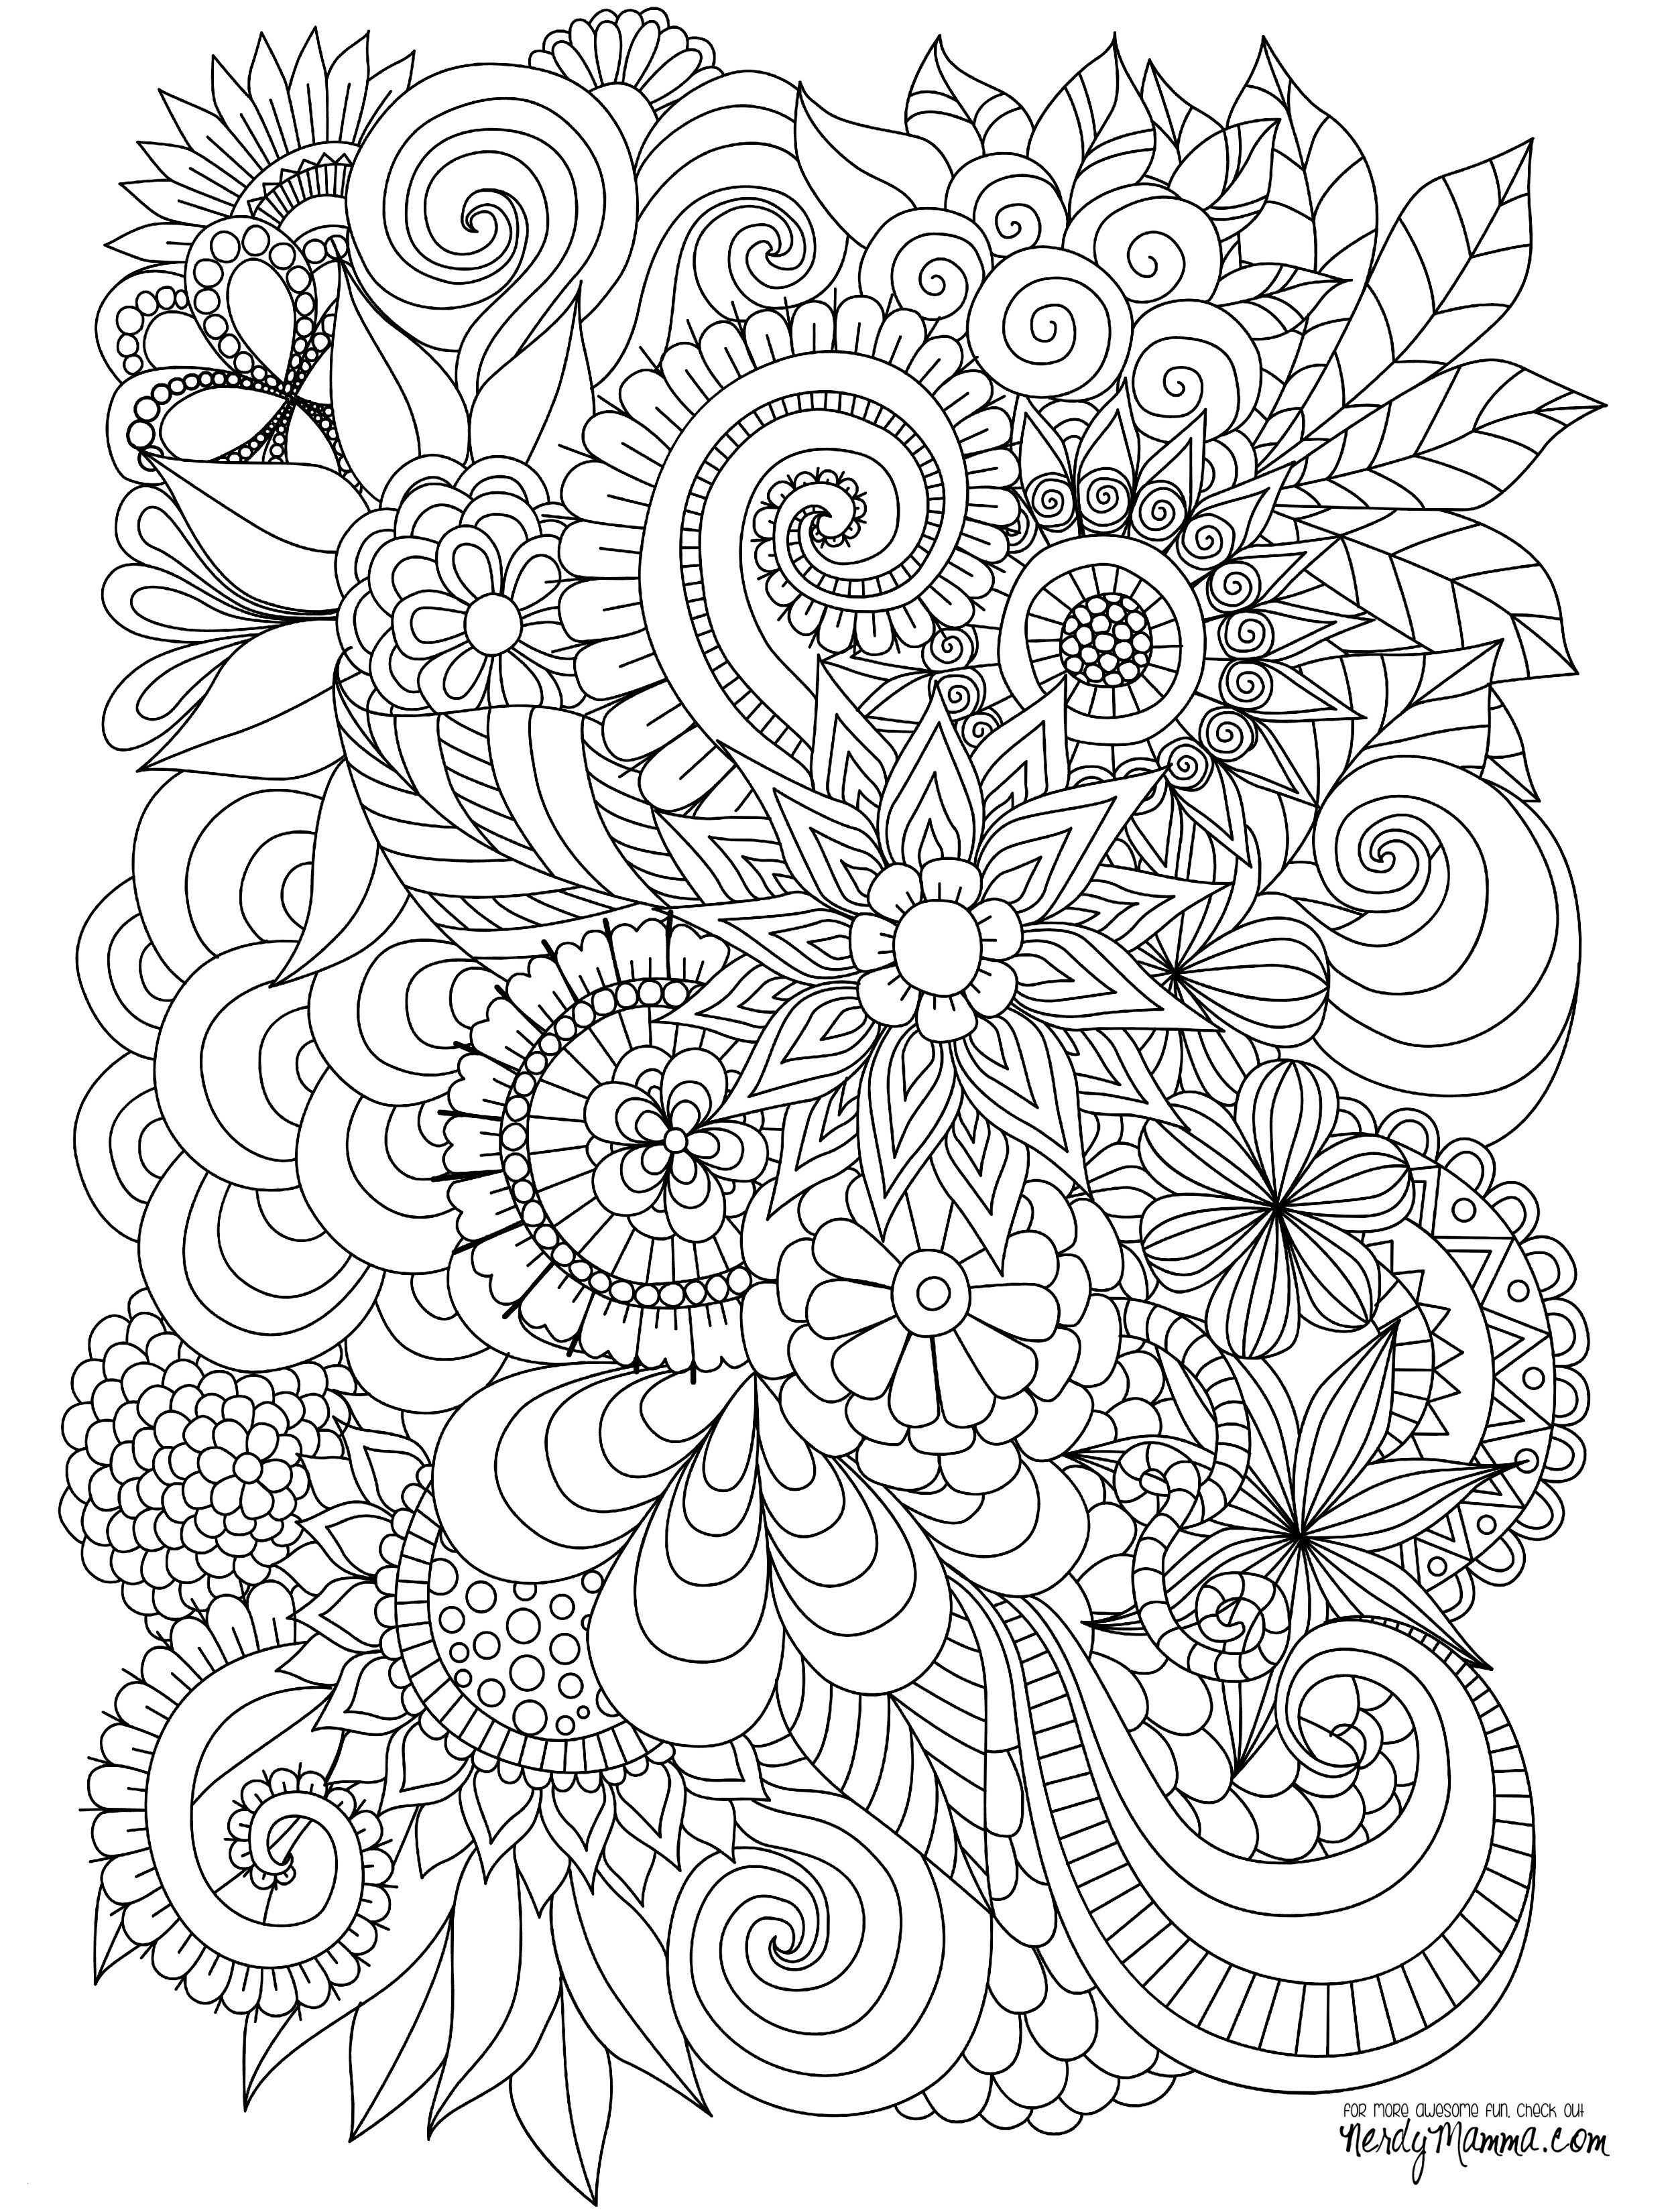 Coloring Pages ~ Mindfulness Coloring Pages Free Printable Zen For - Free Printable Zen Coloring Pages